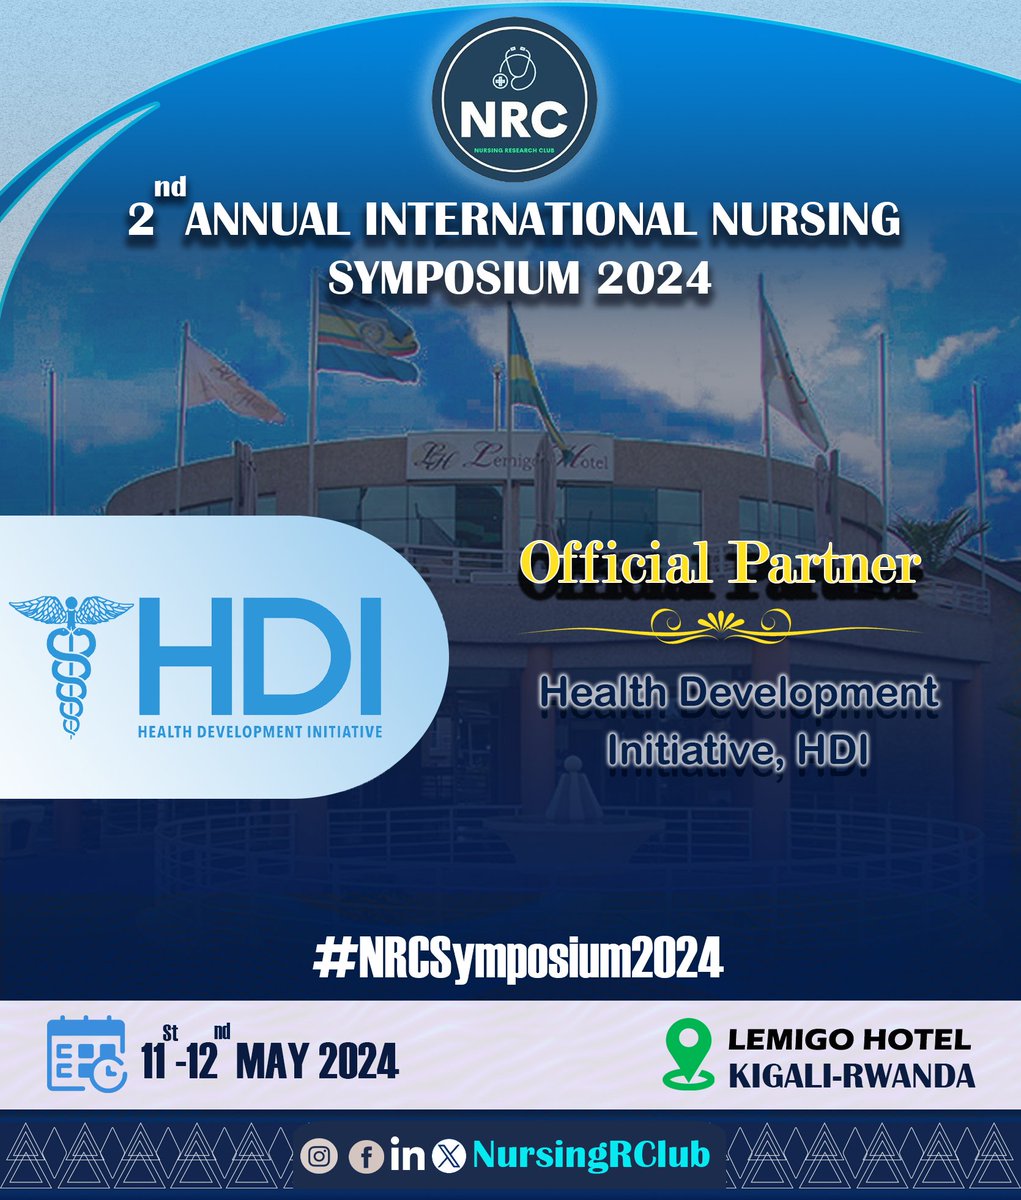 🚨📢#NewStrongPartnership 🚨 We are excited to announce @HDIRwanda as an official partner of #2ndAnnualInternationalNursingSymposium2024. Our Partnership will promote the spirit of health research and innovation. #NRCSymposium2024 #YouthInResearch @aflodiskagaba @BrianChirombo